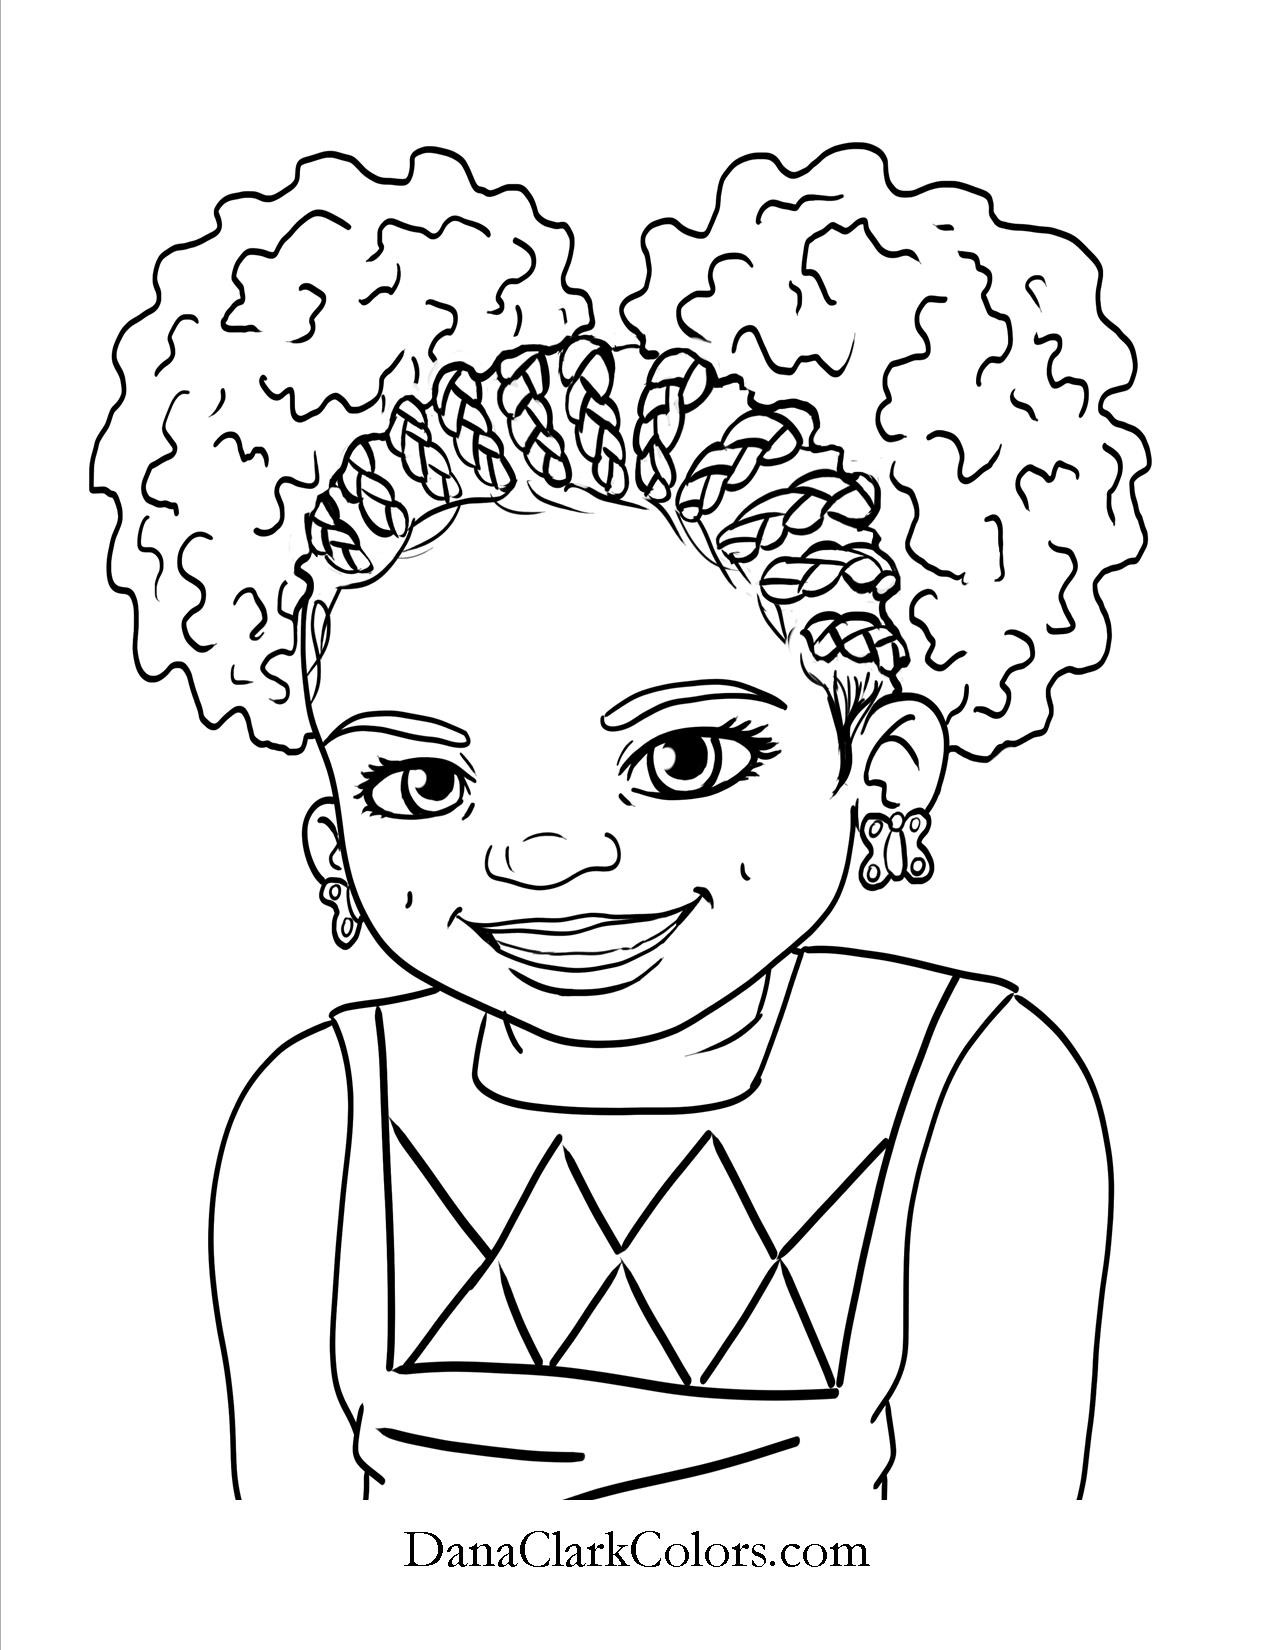 Best ideas about O Coloring Pages For Teens
. Save or Pin Free Coloring Page 4 DanaClarkColors Now.